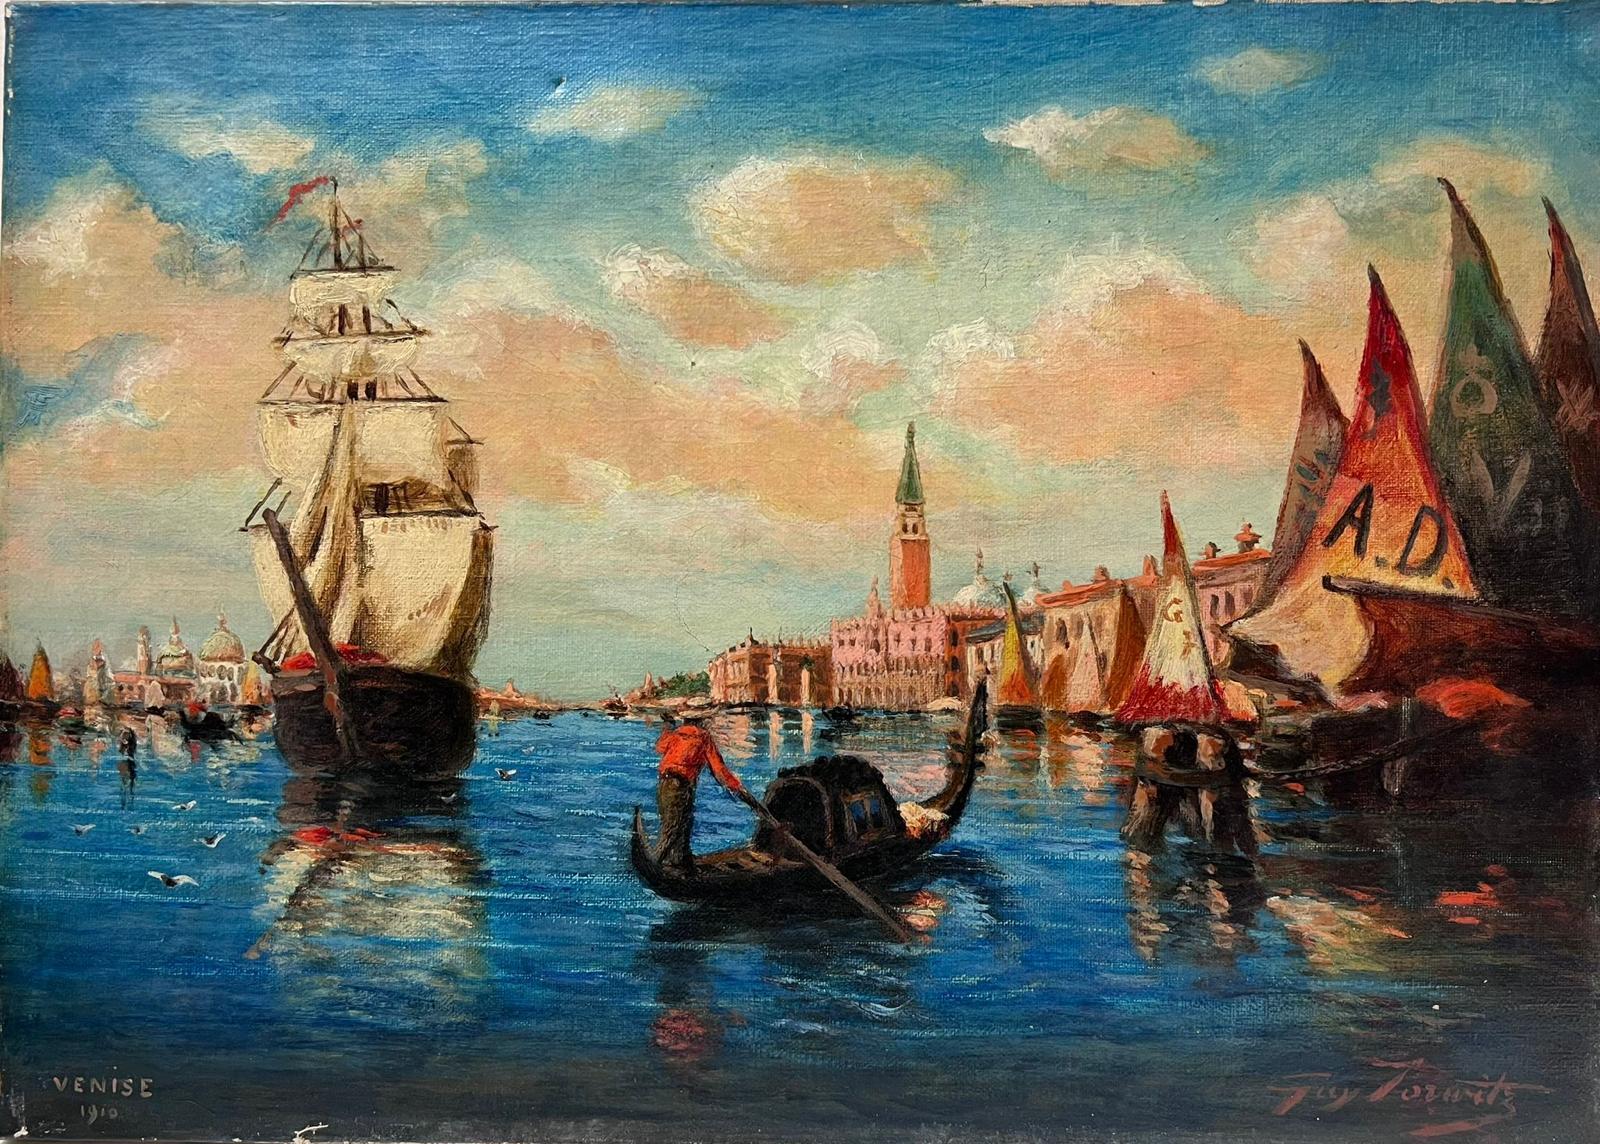 The Grand Canal Venice Antique 1910 Signed Oil Painting on Canvas Many Boats